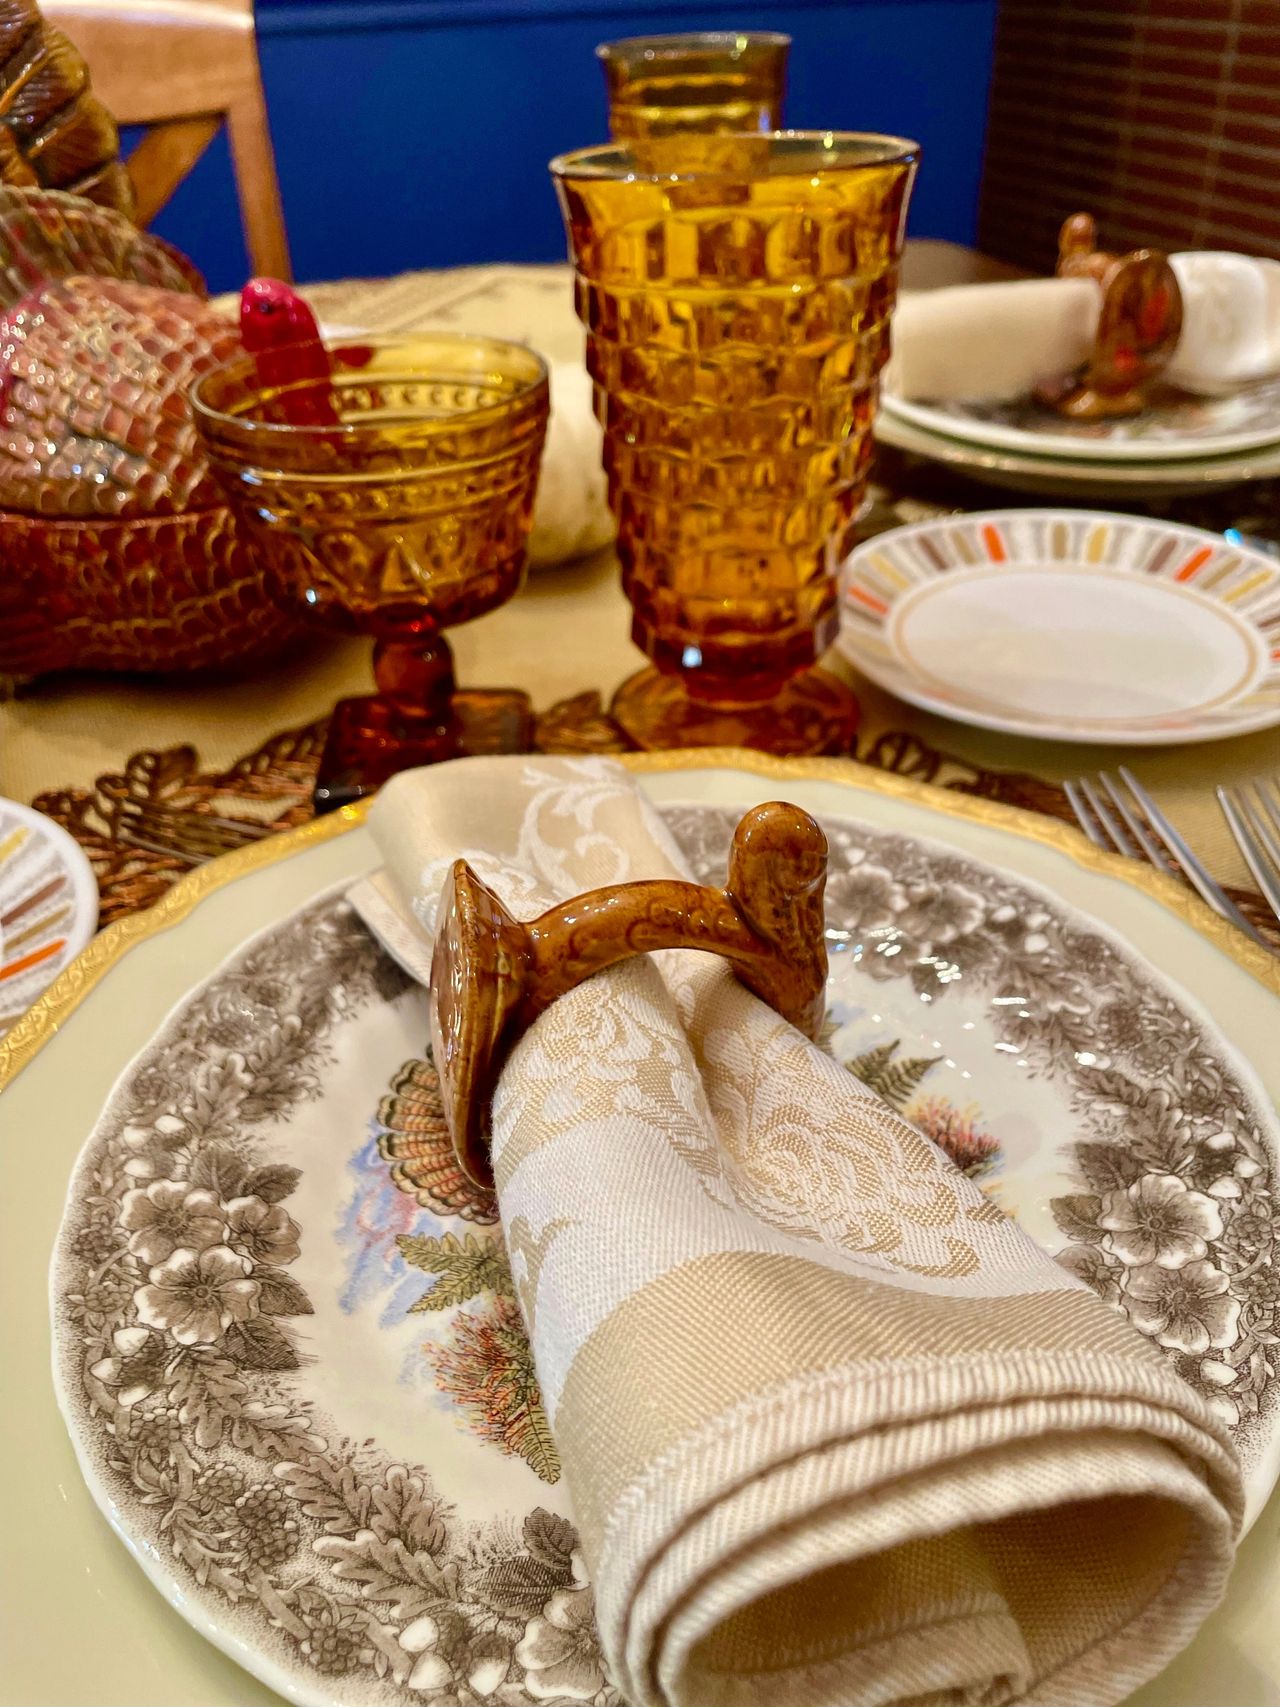 Turkey plates and napkin ring holder, assortment of plates and glasses